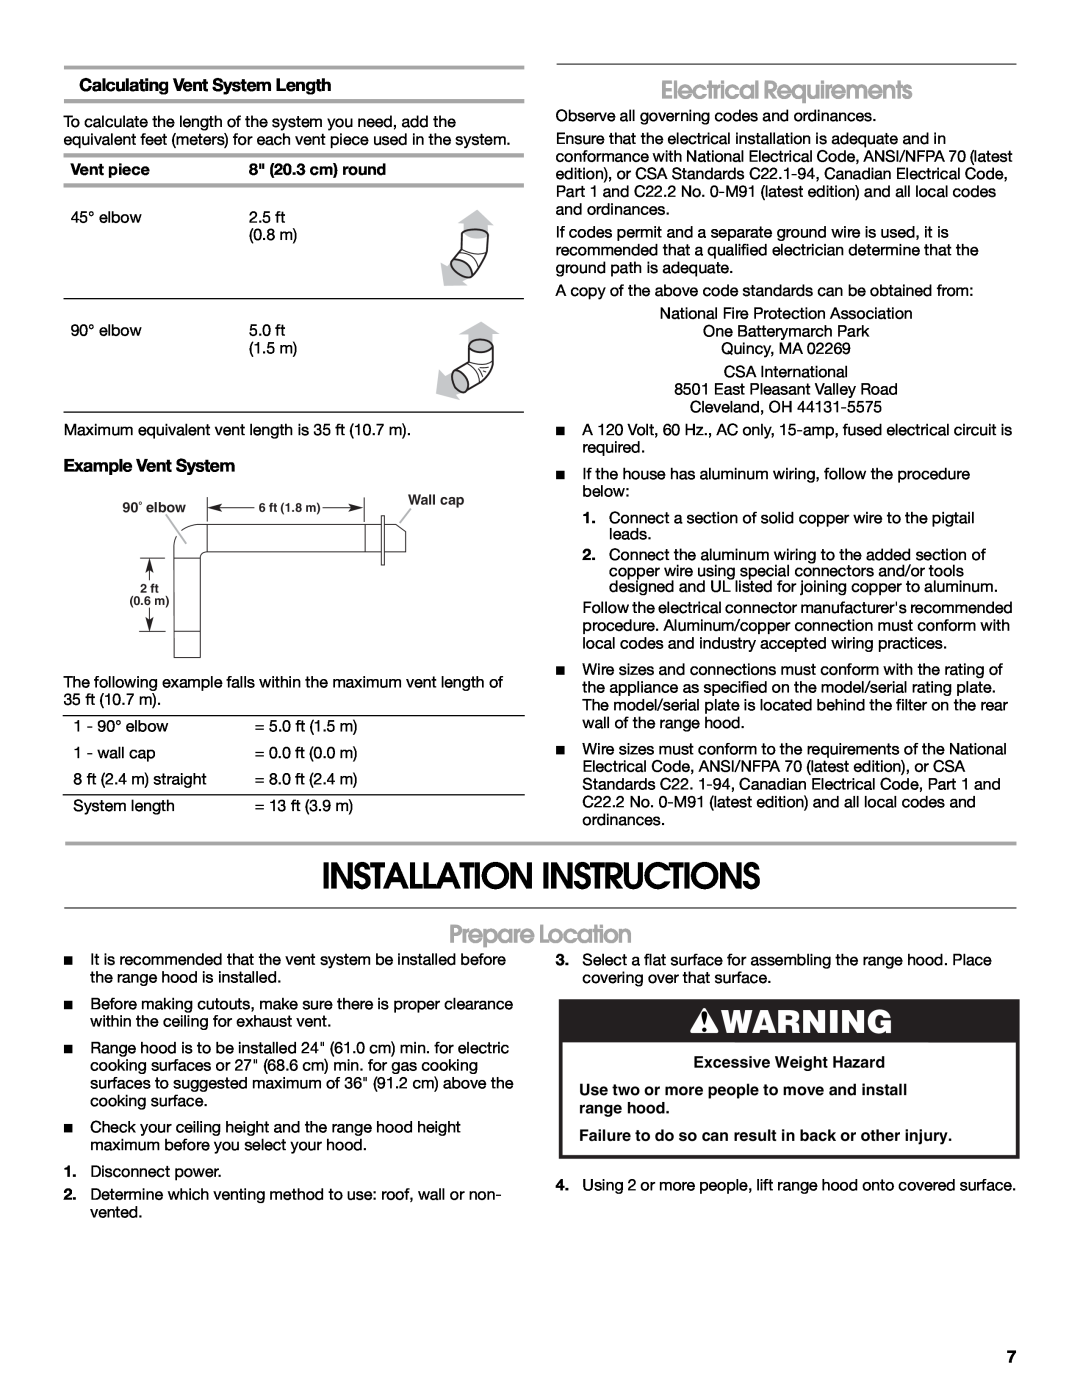 Jenn-Air W10274319E Installation Instructions, Electrical Requirements, Prepare Location, Calculating Vent System Length 